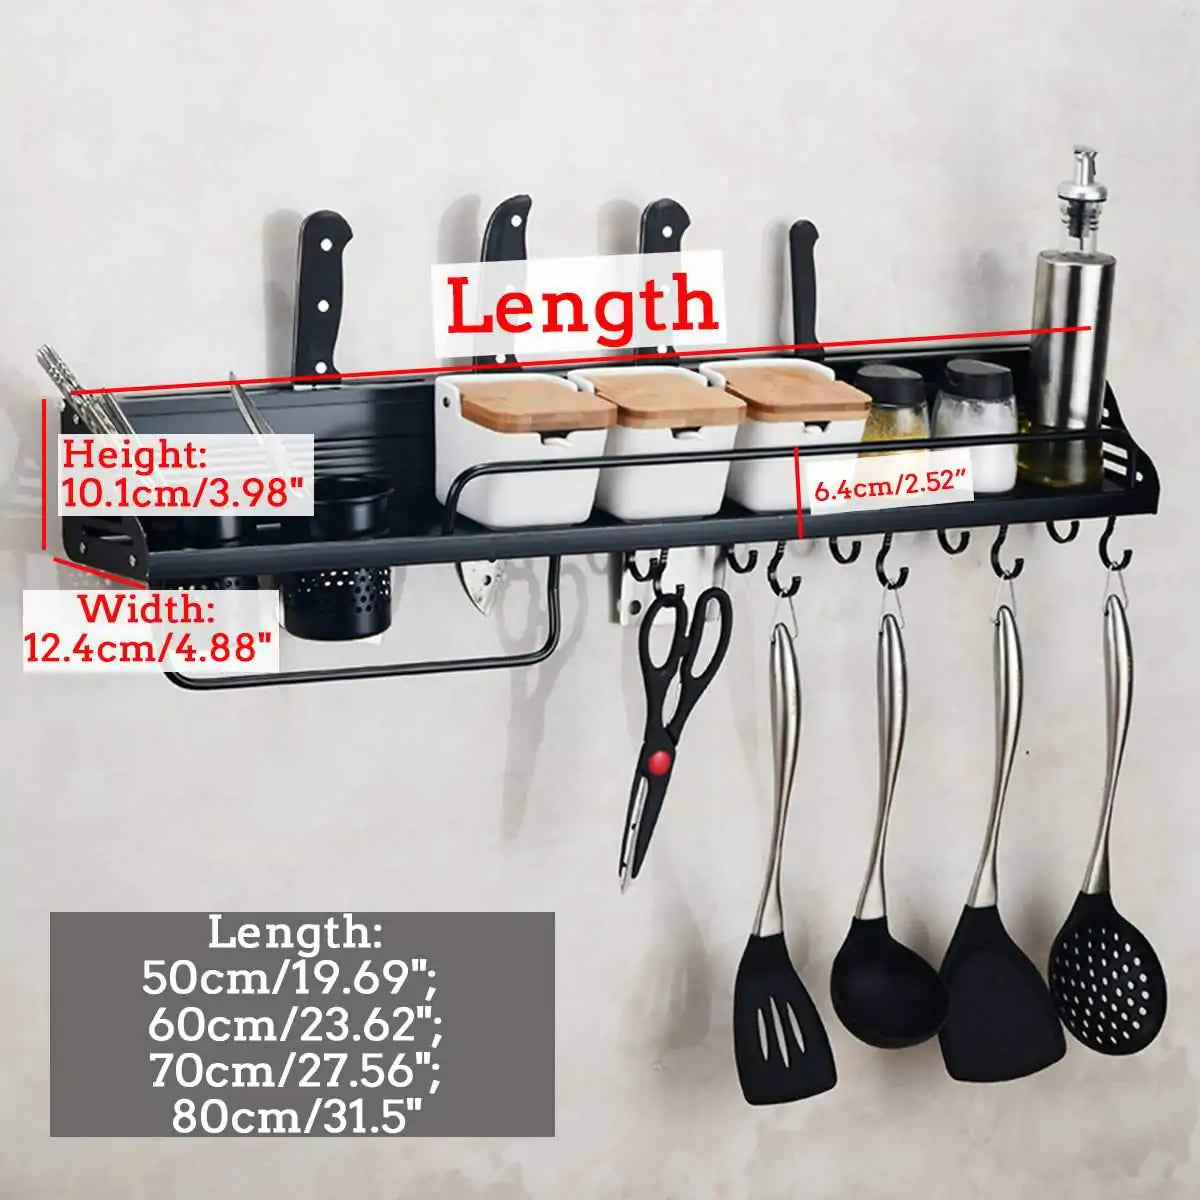 "Organize your kitchen with our versatile rack solution."